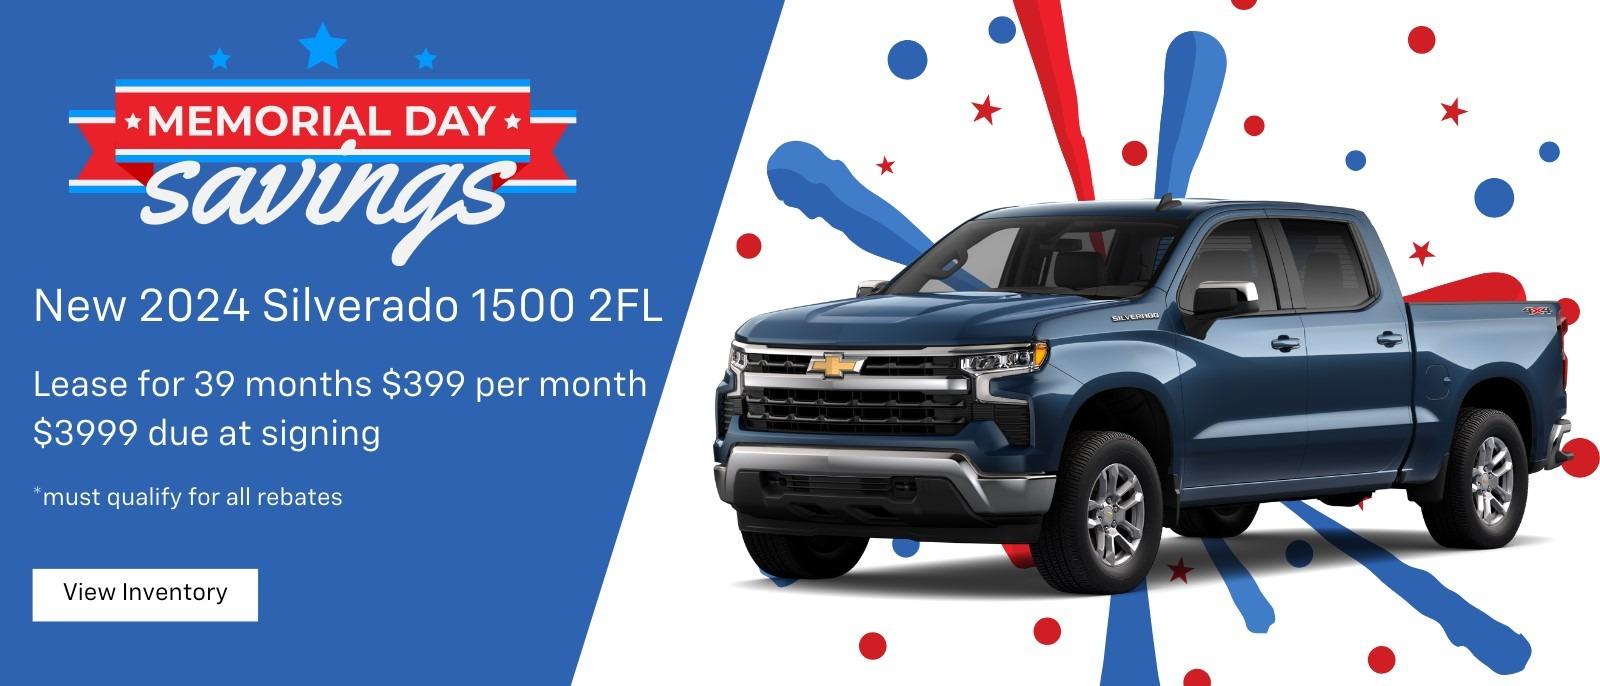 Memorial Day Savings - Chevrolet: Celebrate the holiday with incredible discounts on Chevrolet vehicles. Don't miss out on these limited-time offers!